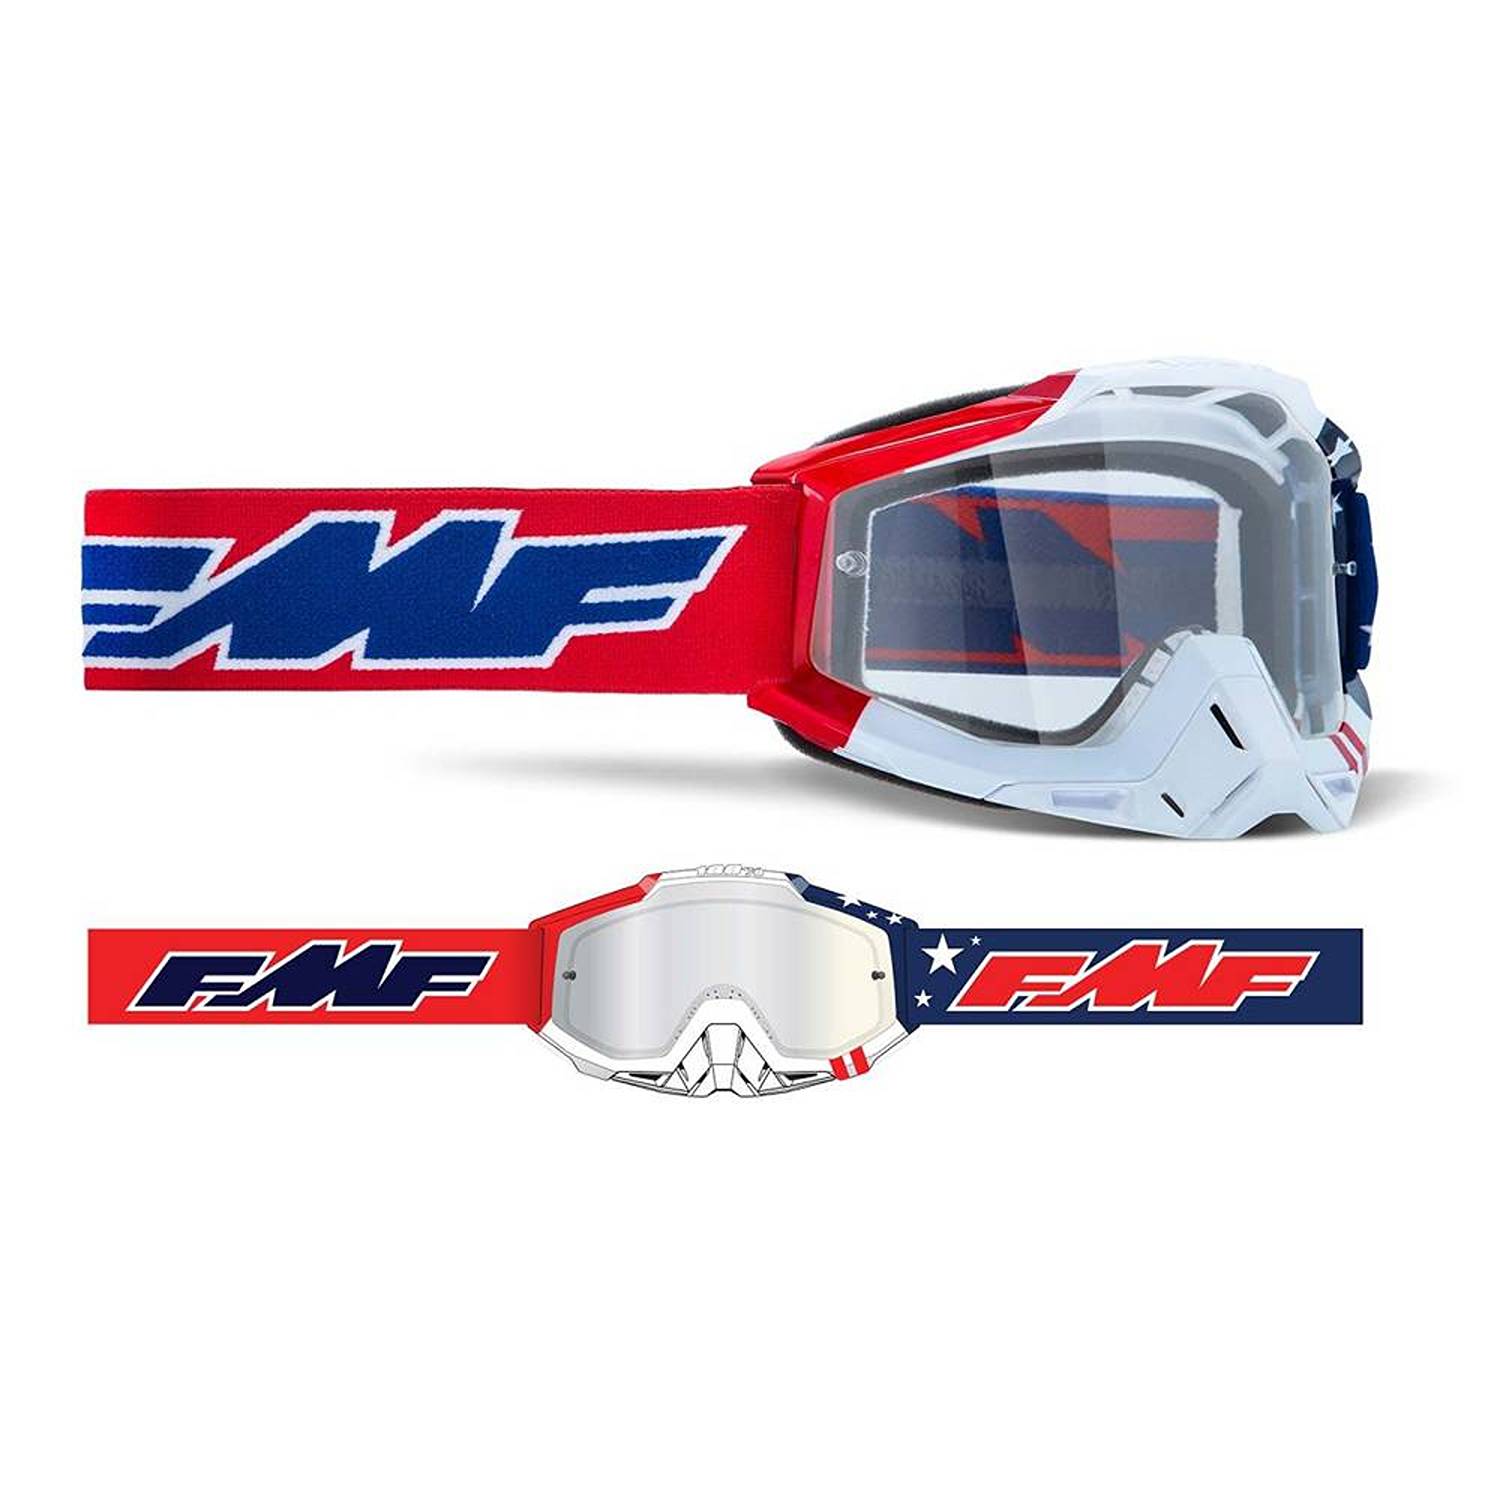 FMF Powerbomb Rocket US of A Clear Goggles Size